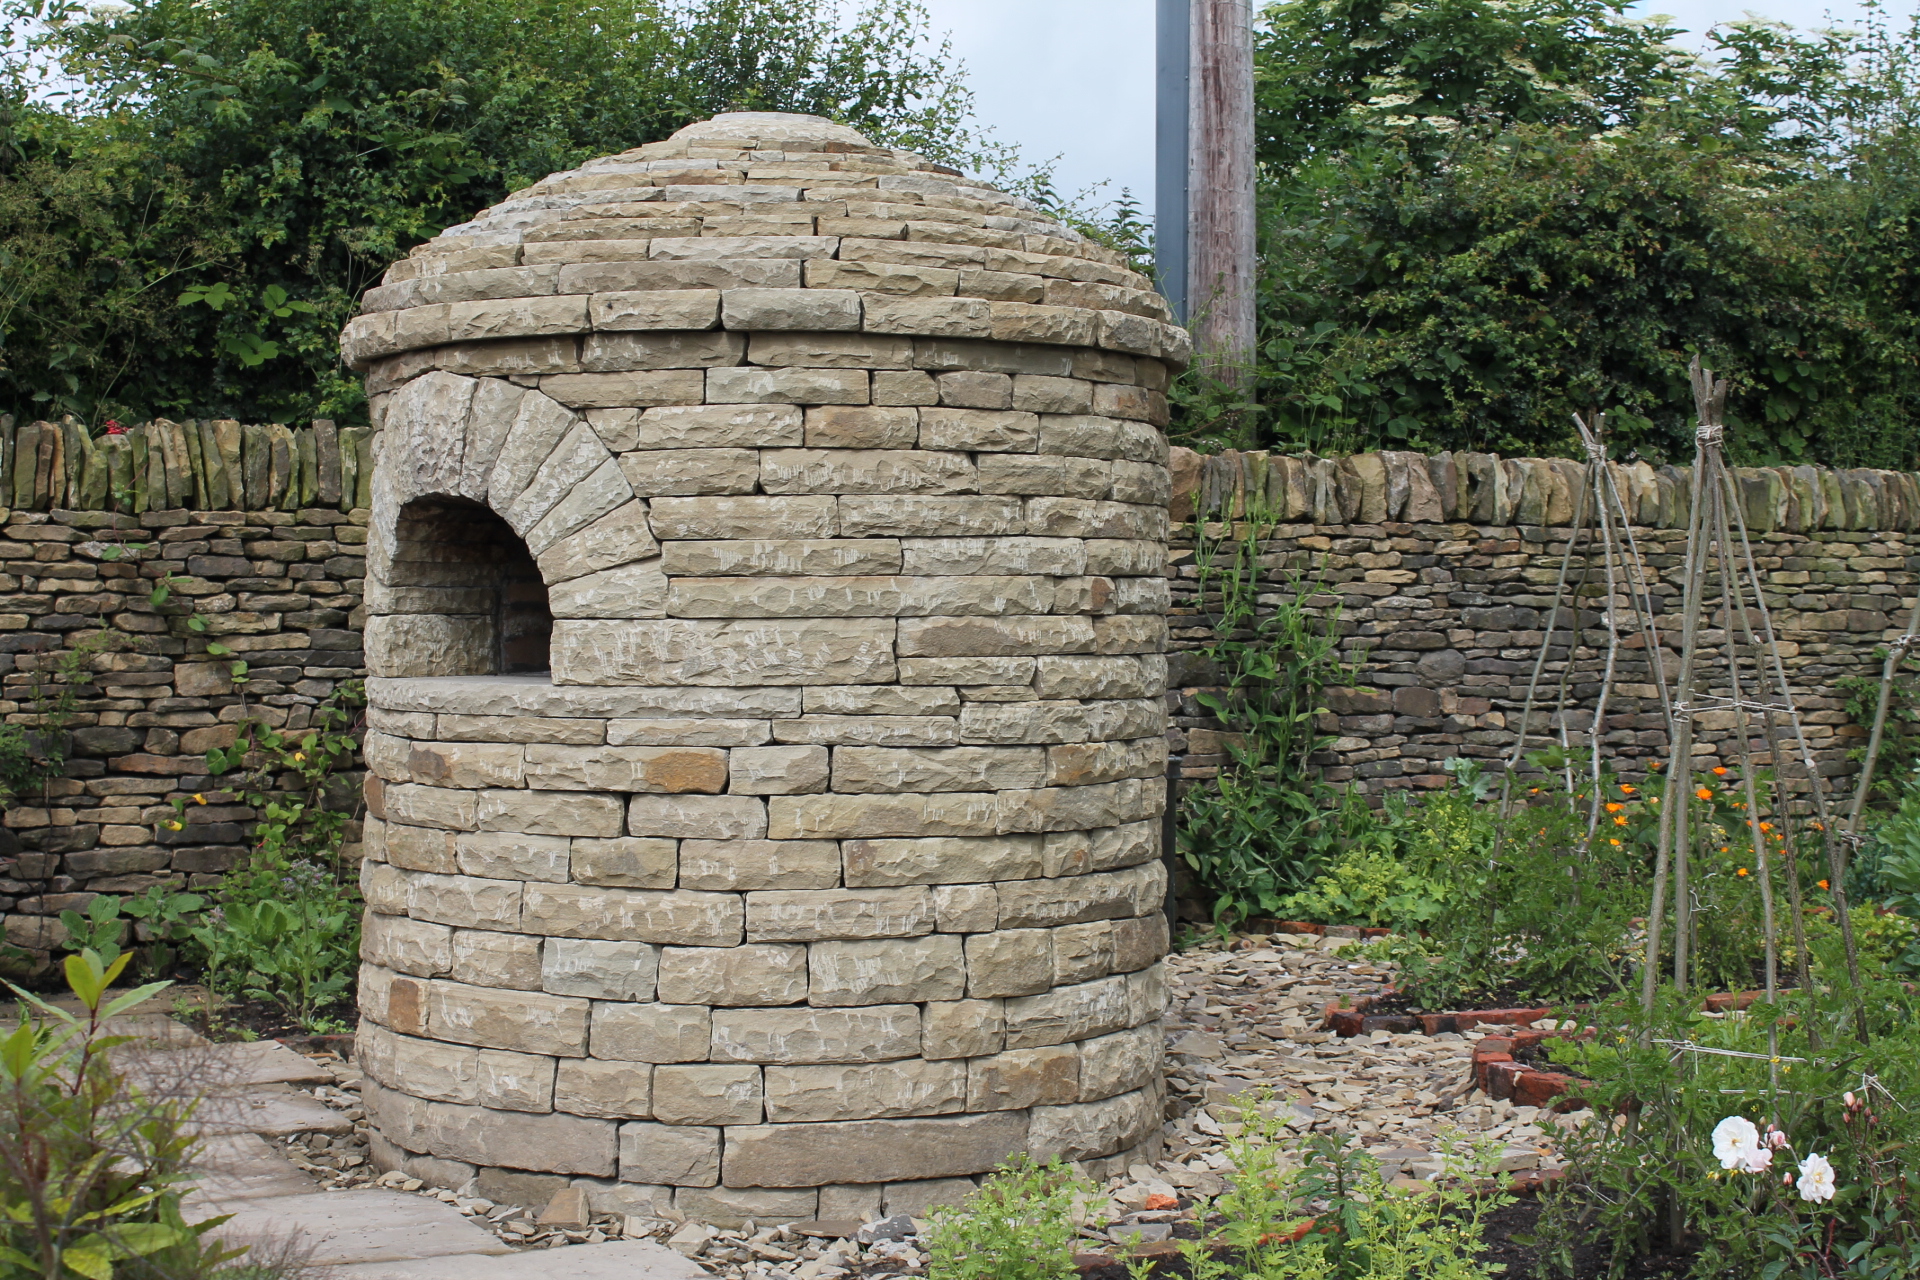 The completed stone pizza oven standing in a garden